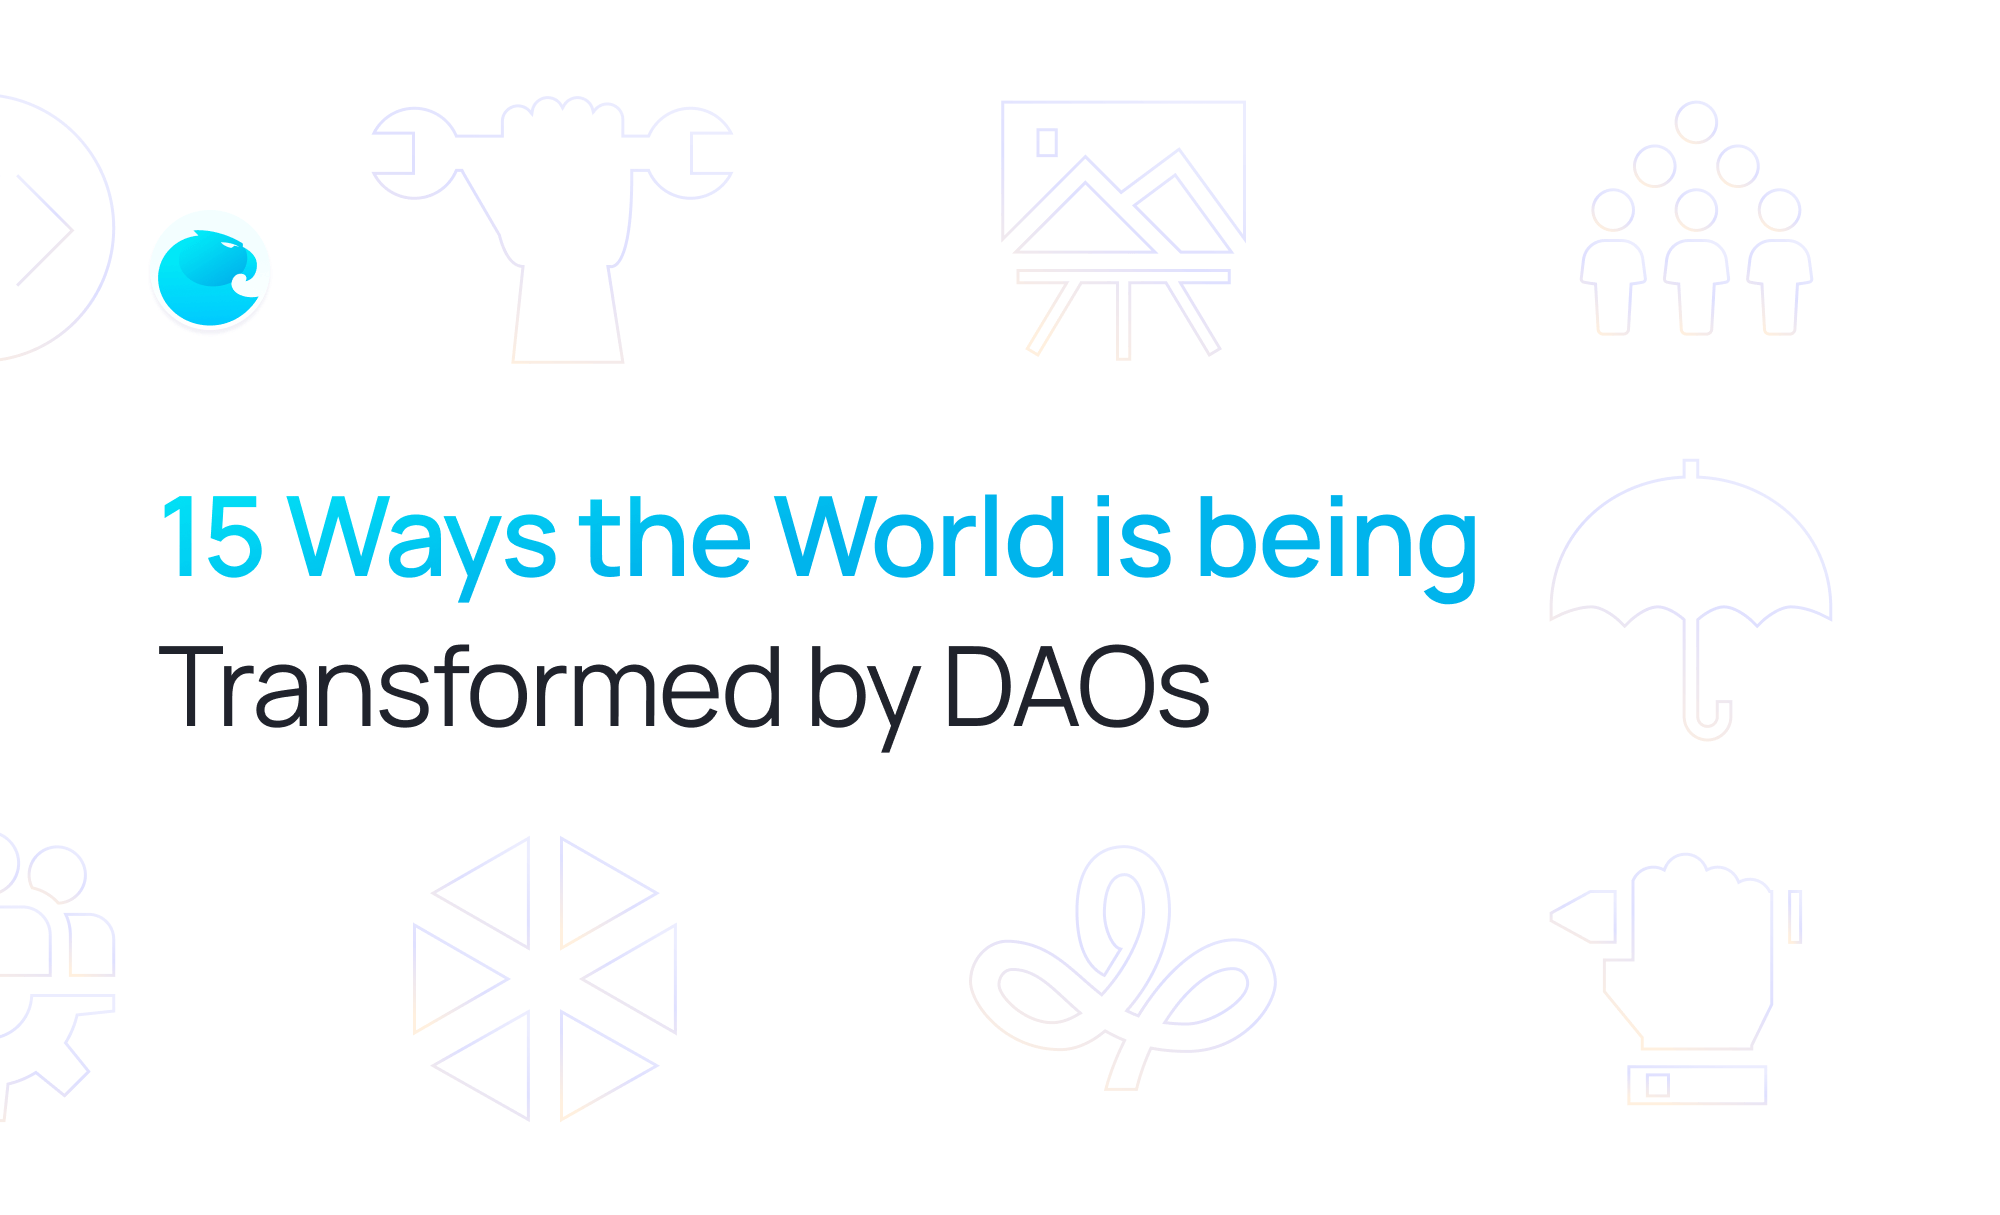 15 Ways the World is being Transformed by DAOs